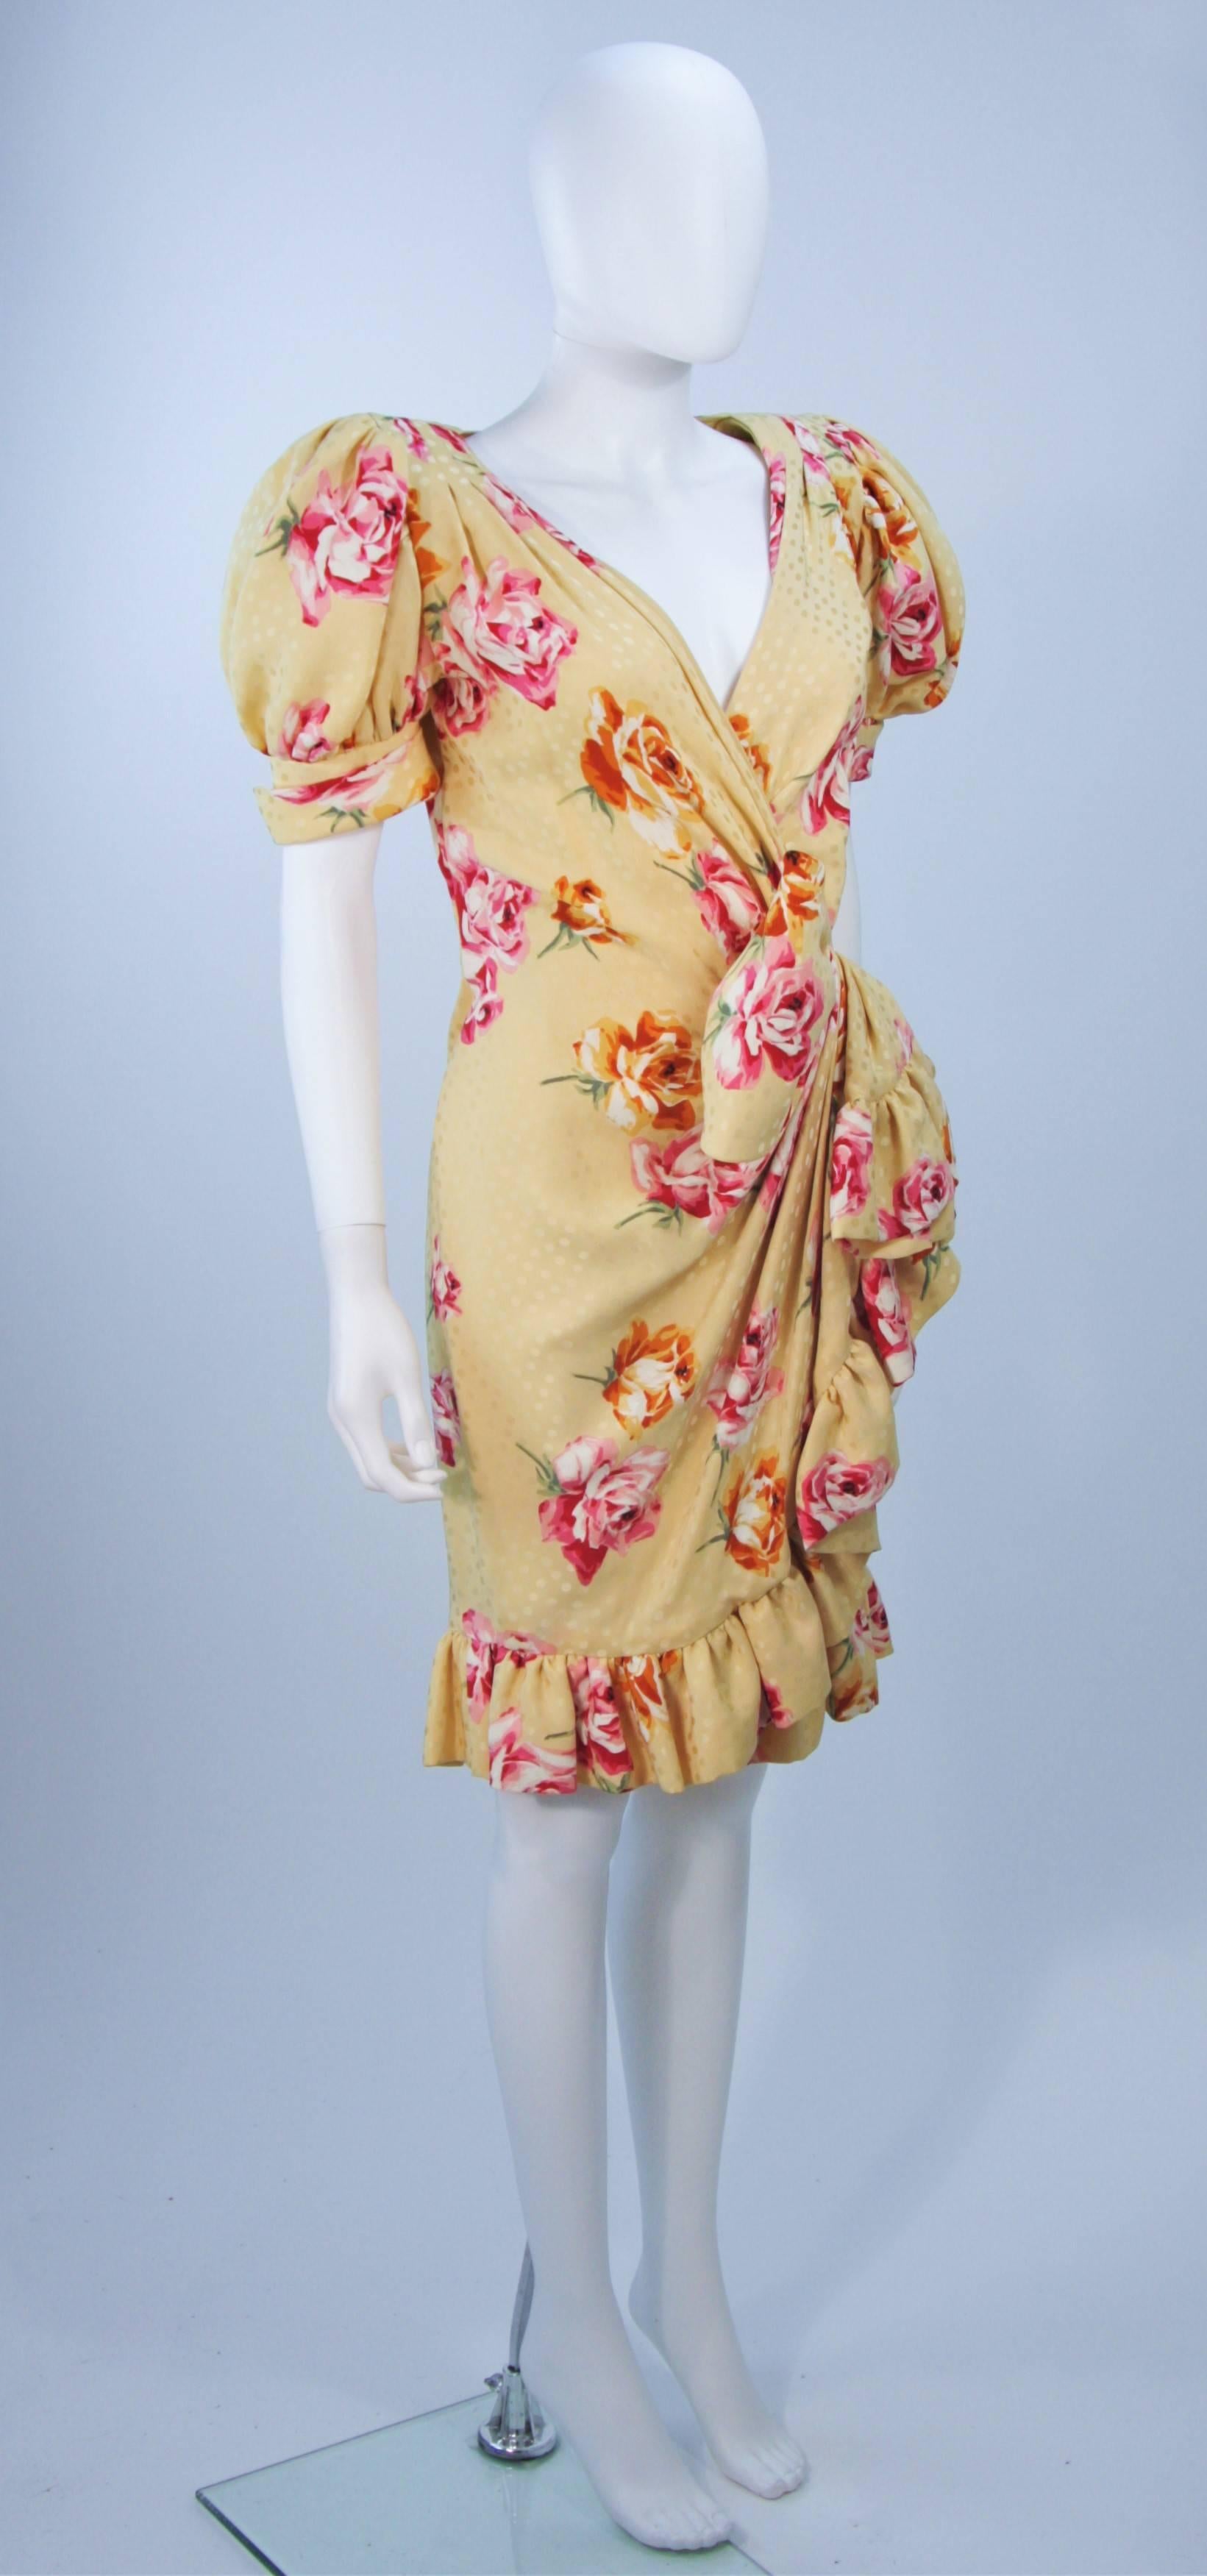 Women's ANDREA ODICINI 1980s Yellow Silk Floral Print Dress with Large Bow Size 4-6